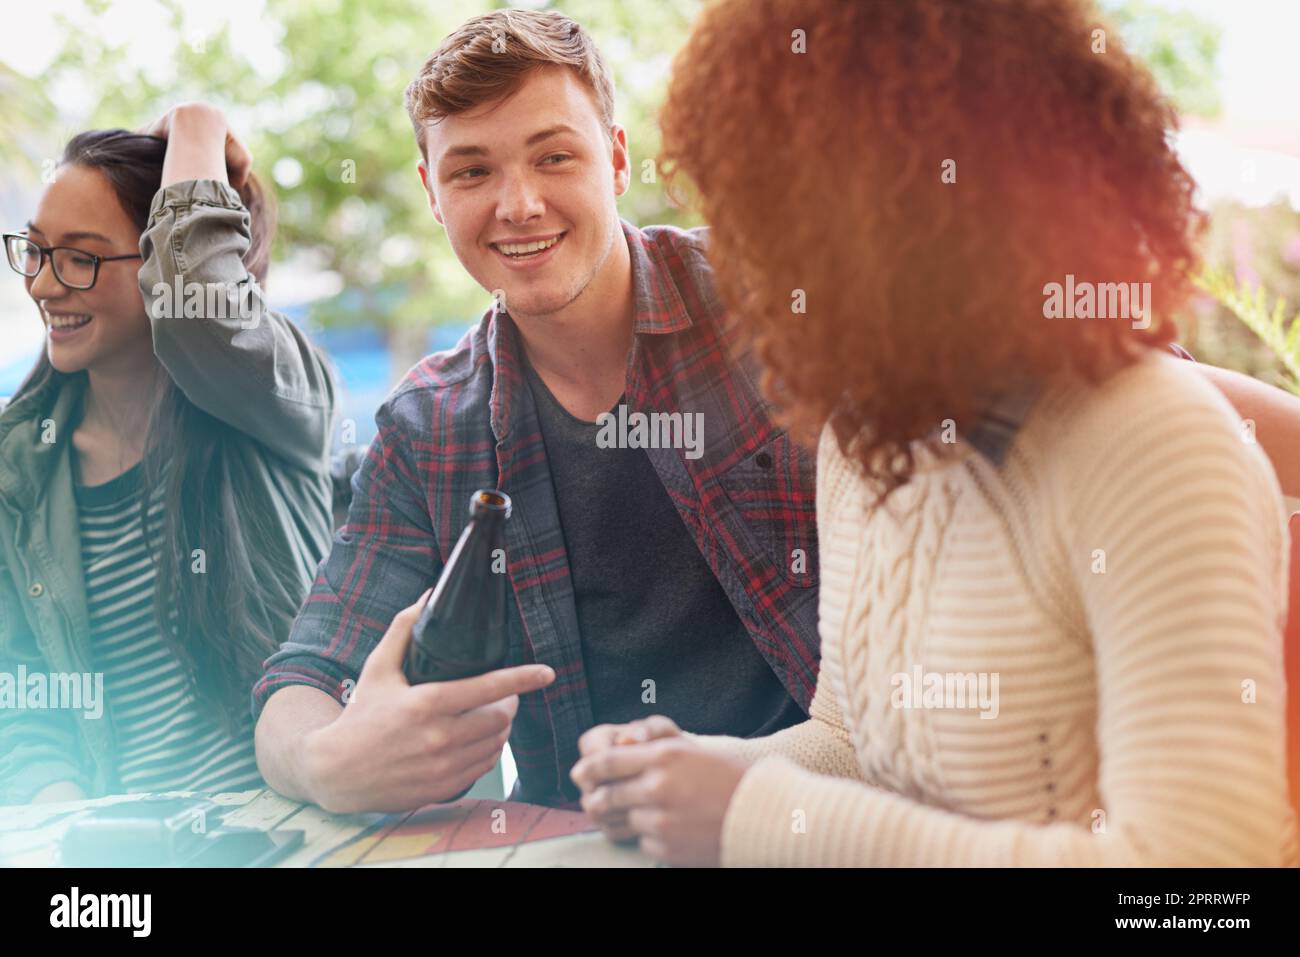 Never know when you might meet the one...a group of friends drinking outdoors. Stock Photo